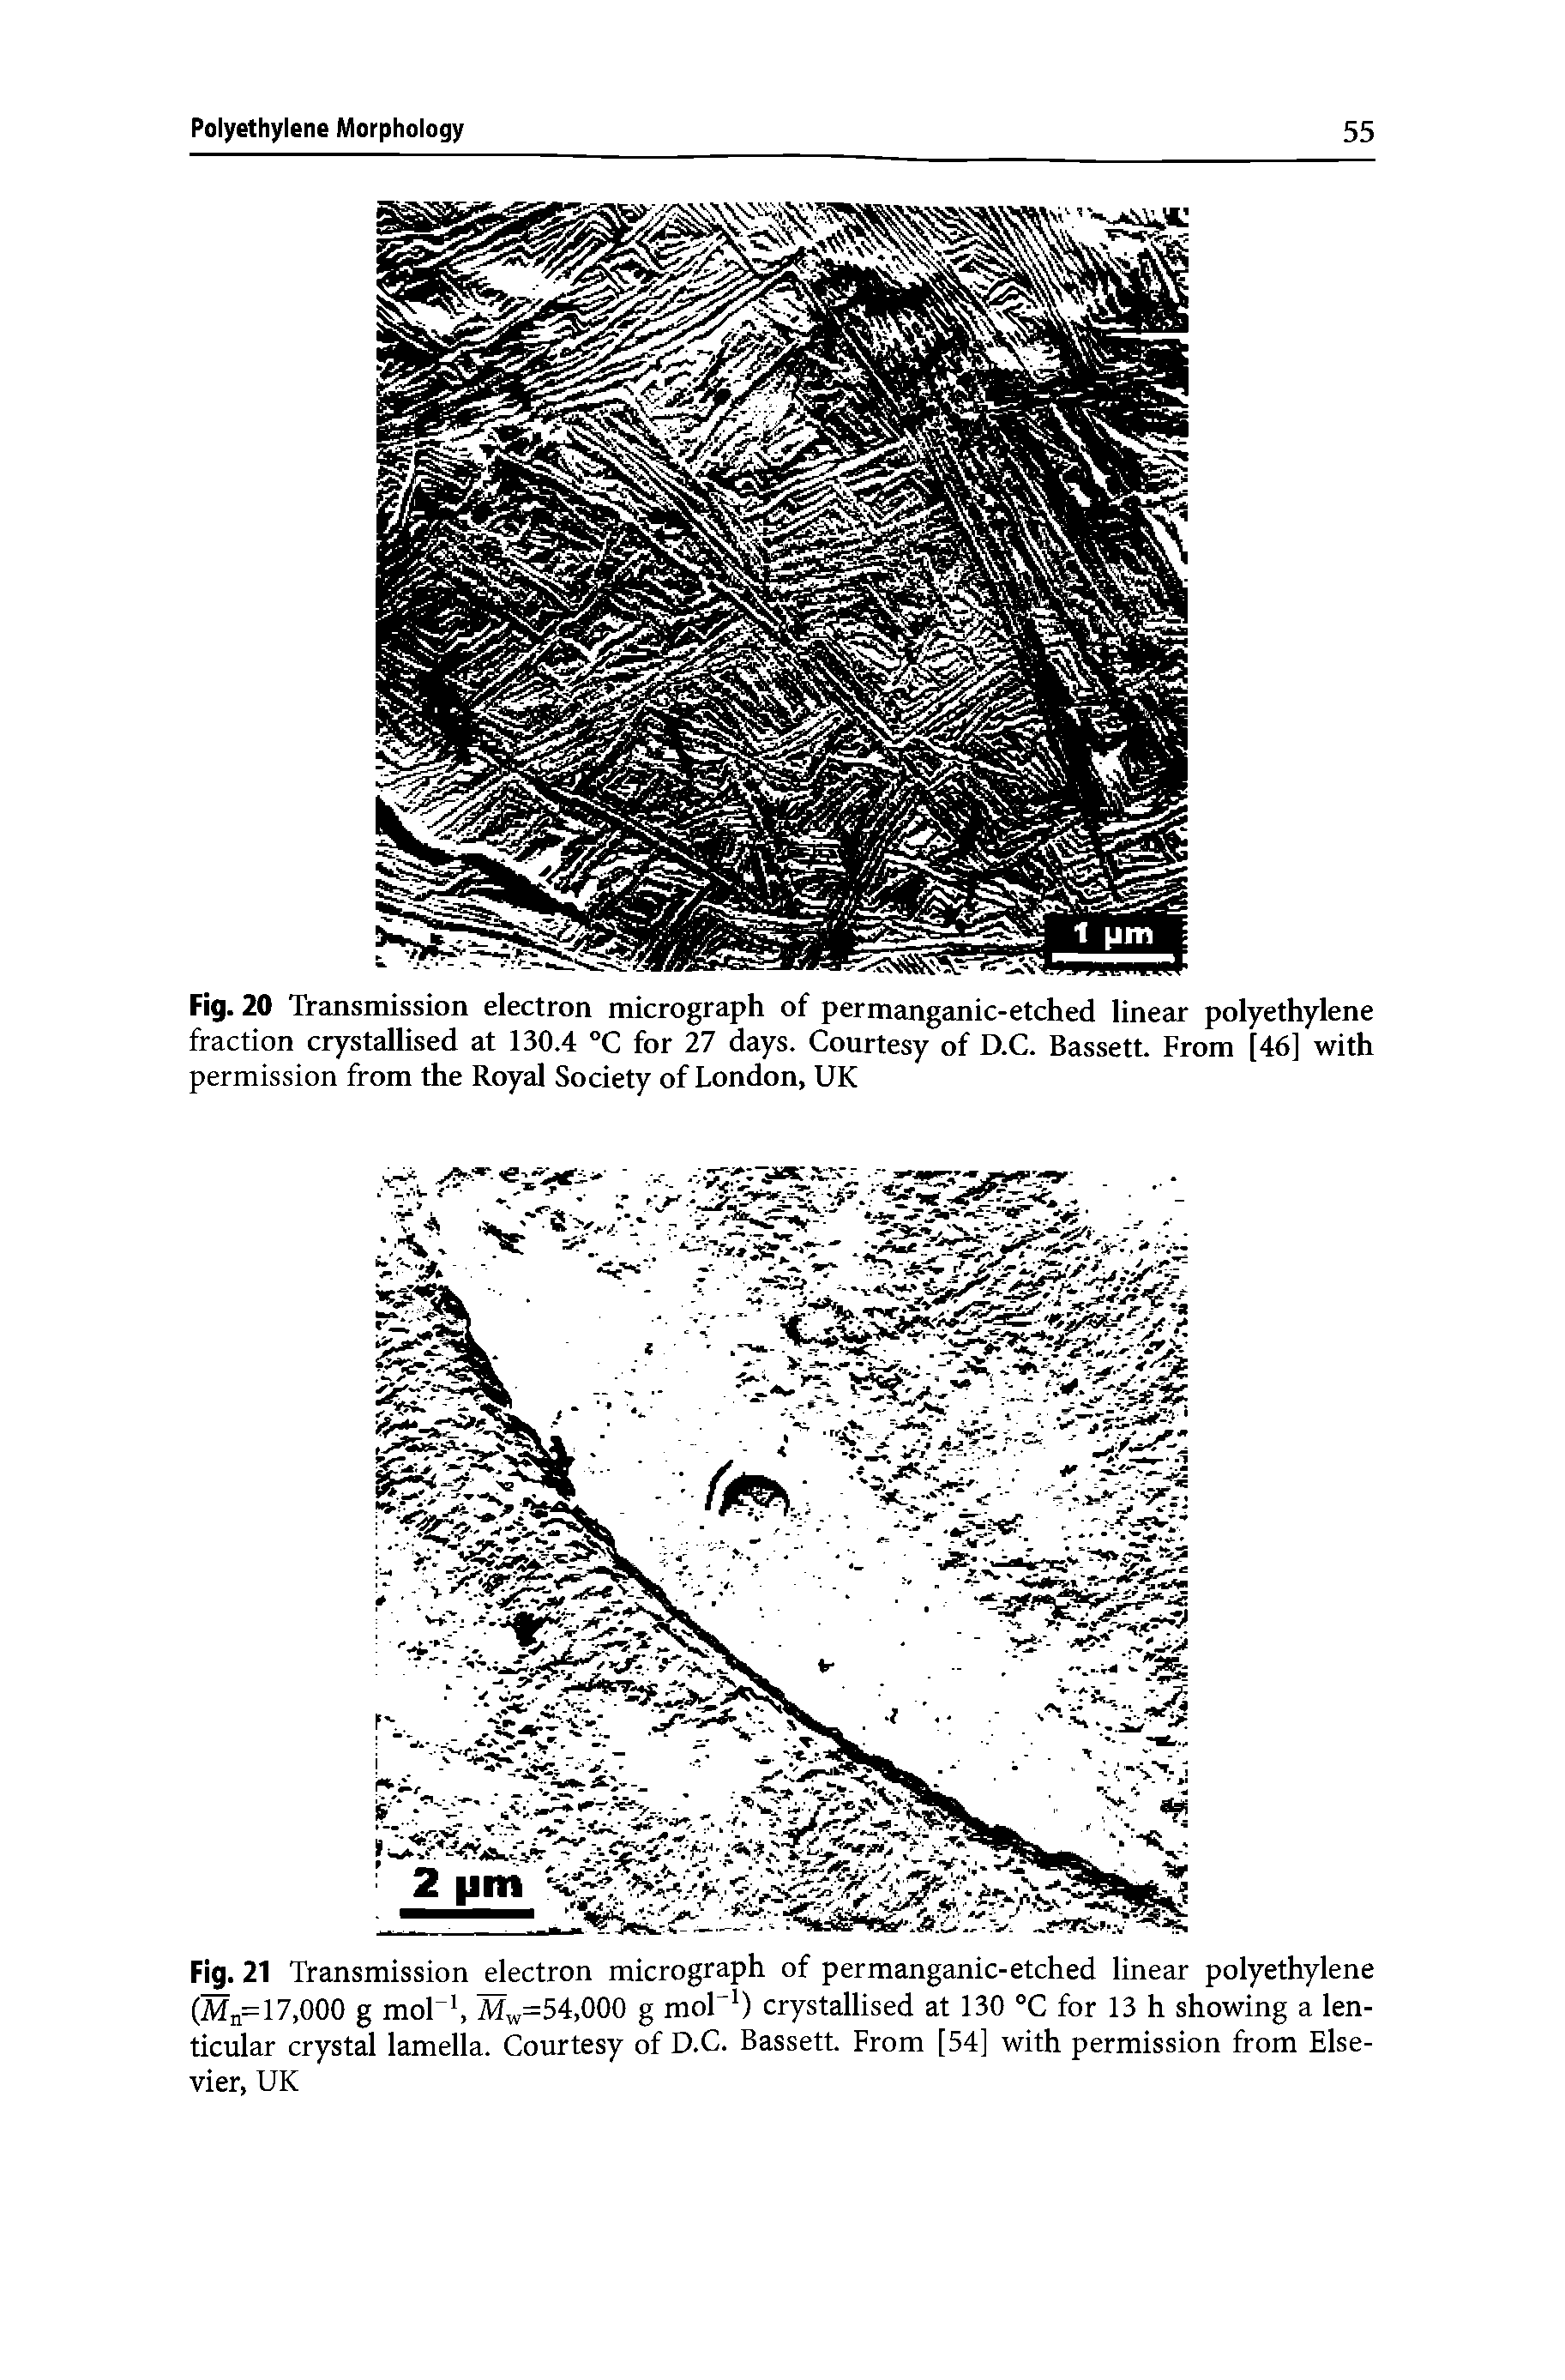 Fig. 21 Transmission electron micrograph of permanganic-etched linear polyethylene (Mn= 17,000 g mol-1, Mw=54,000 g mor1) crystallised at 130 °C for 13 h showing a lenticular crystal lamella. Courtesy of D.C. Bassett. From [54] with permission from Elsevier, UK...